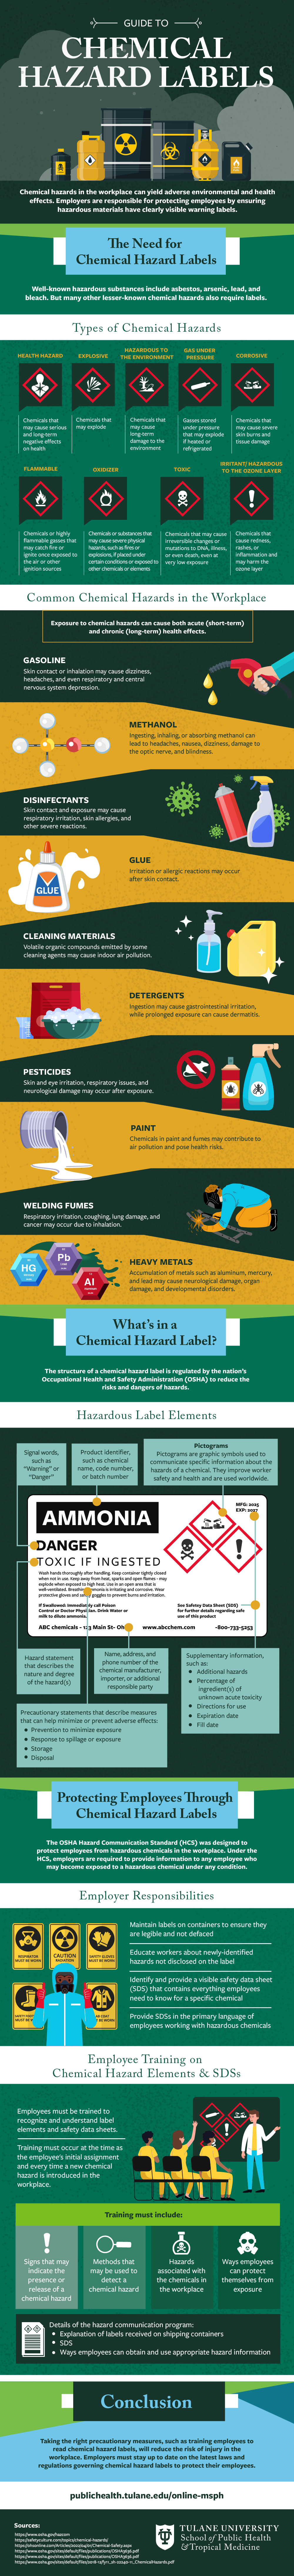 Infographic explaining chemical hazard labels in the workplace